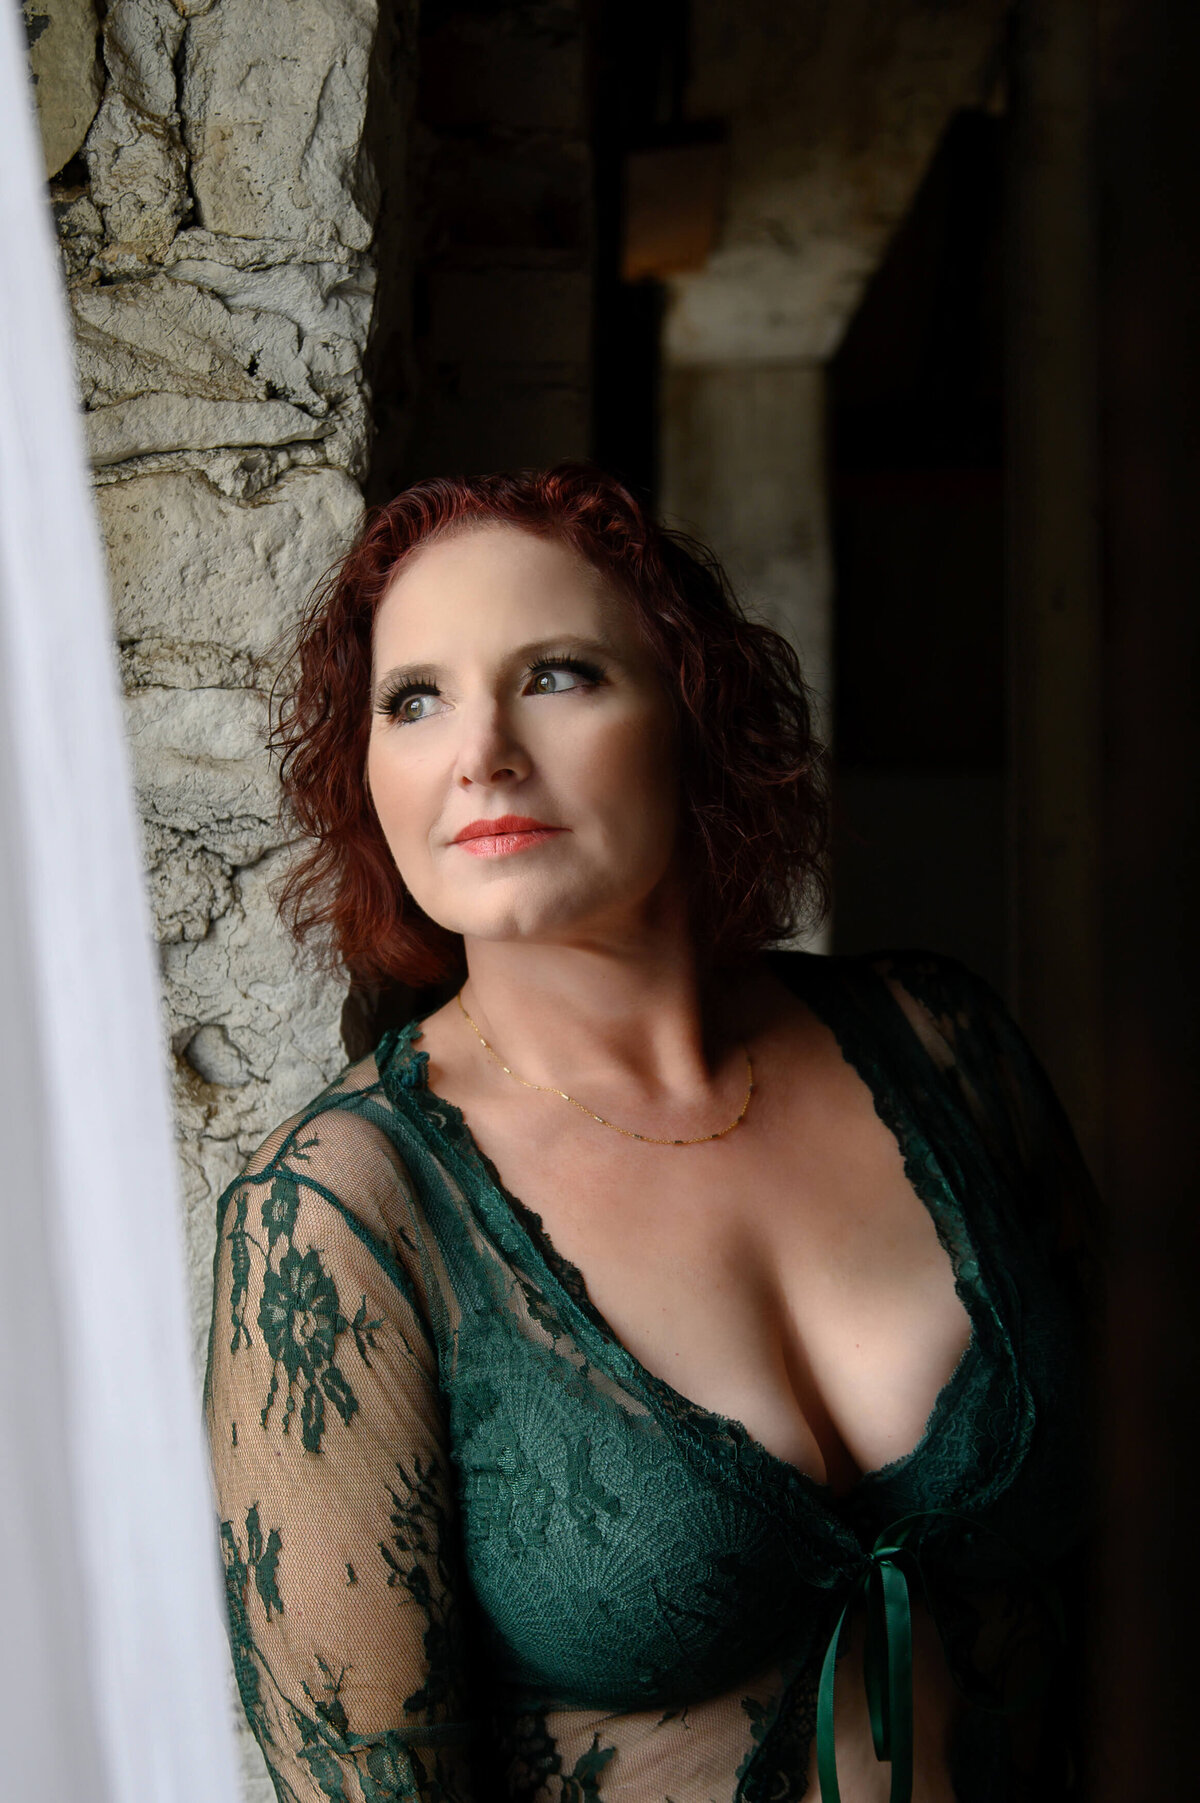 Red haired woman in green bra leaning against a brick wall looking out the window for her Toronto Boudoir Photography session